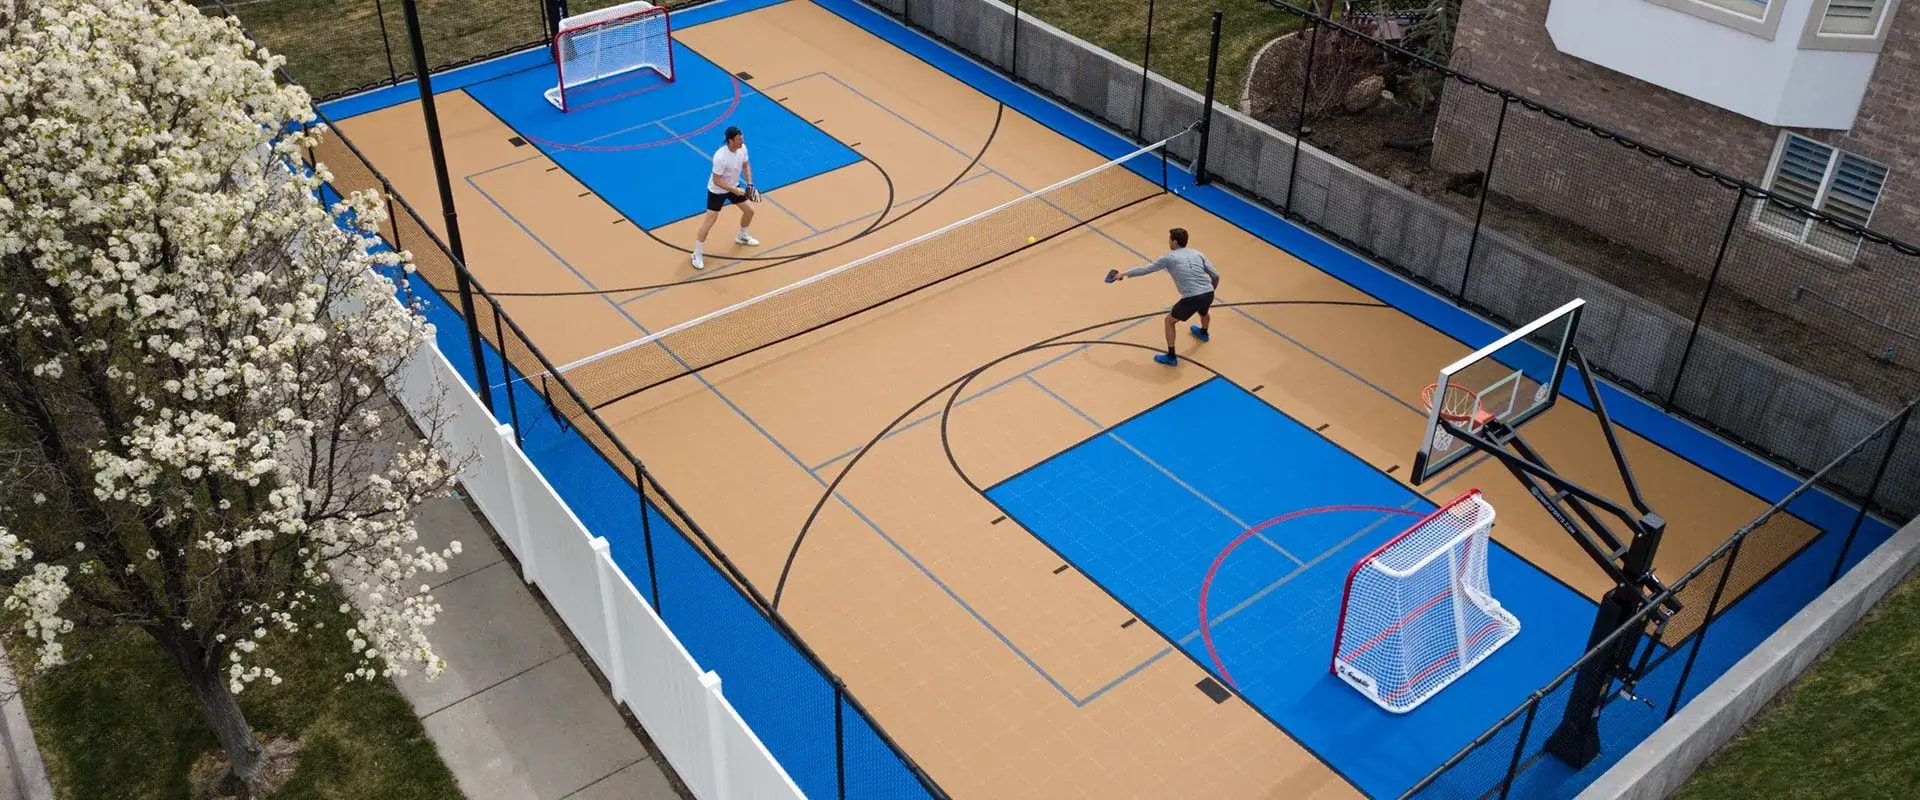 newly installed pickleball court by courts and green in Bakersfield, CA